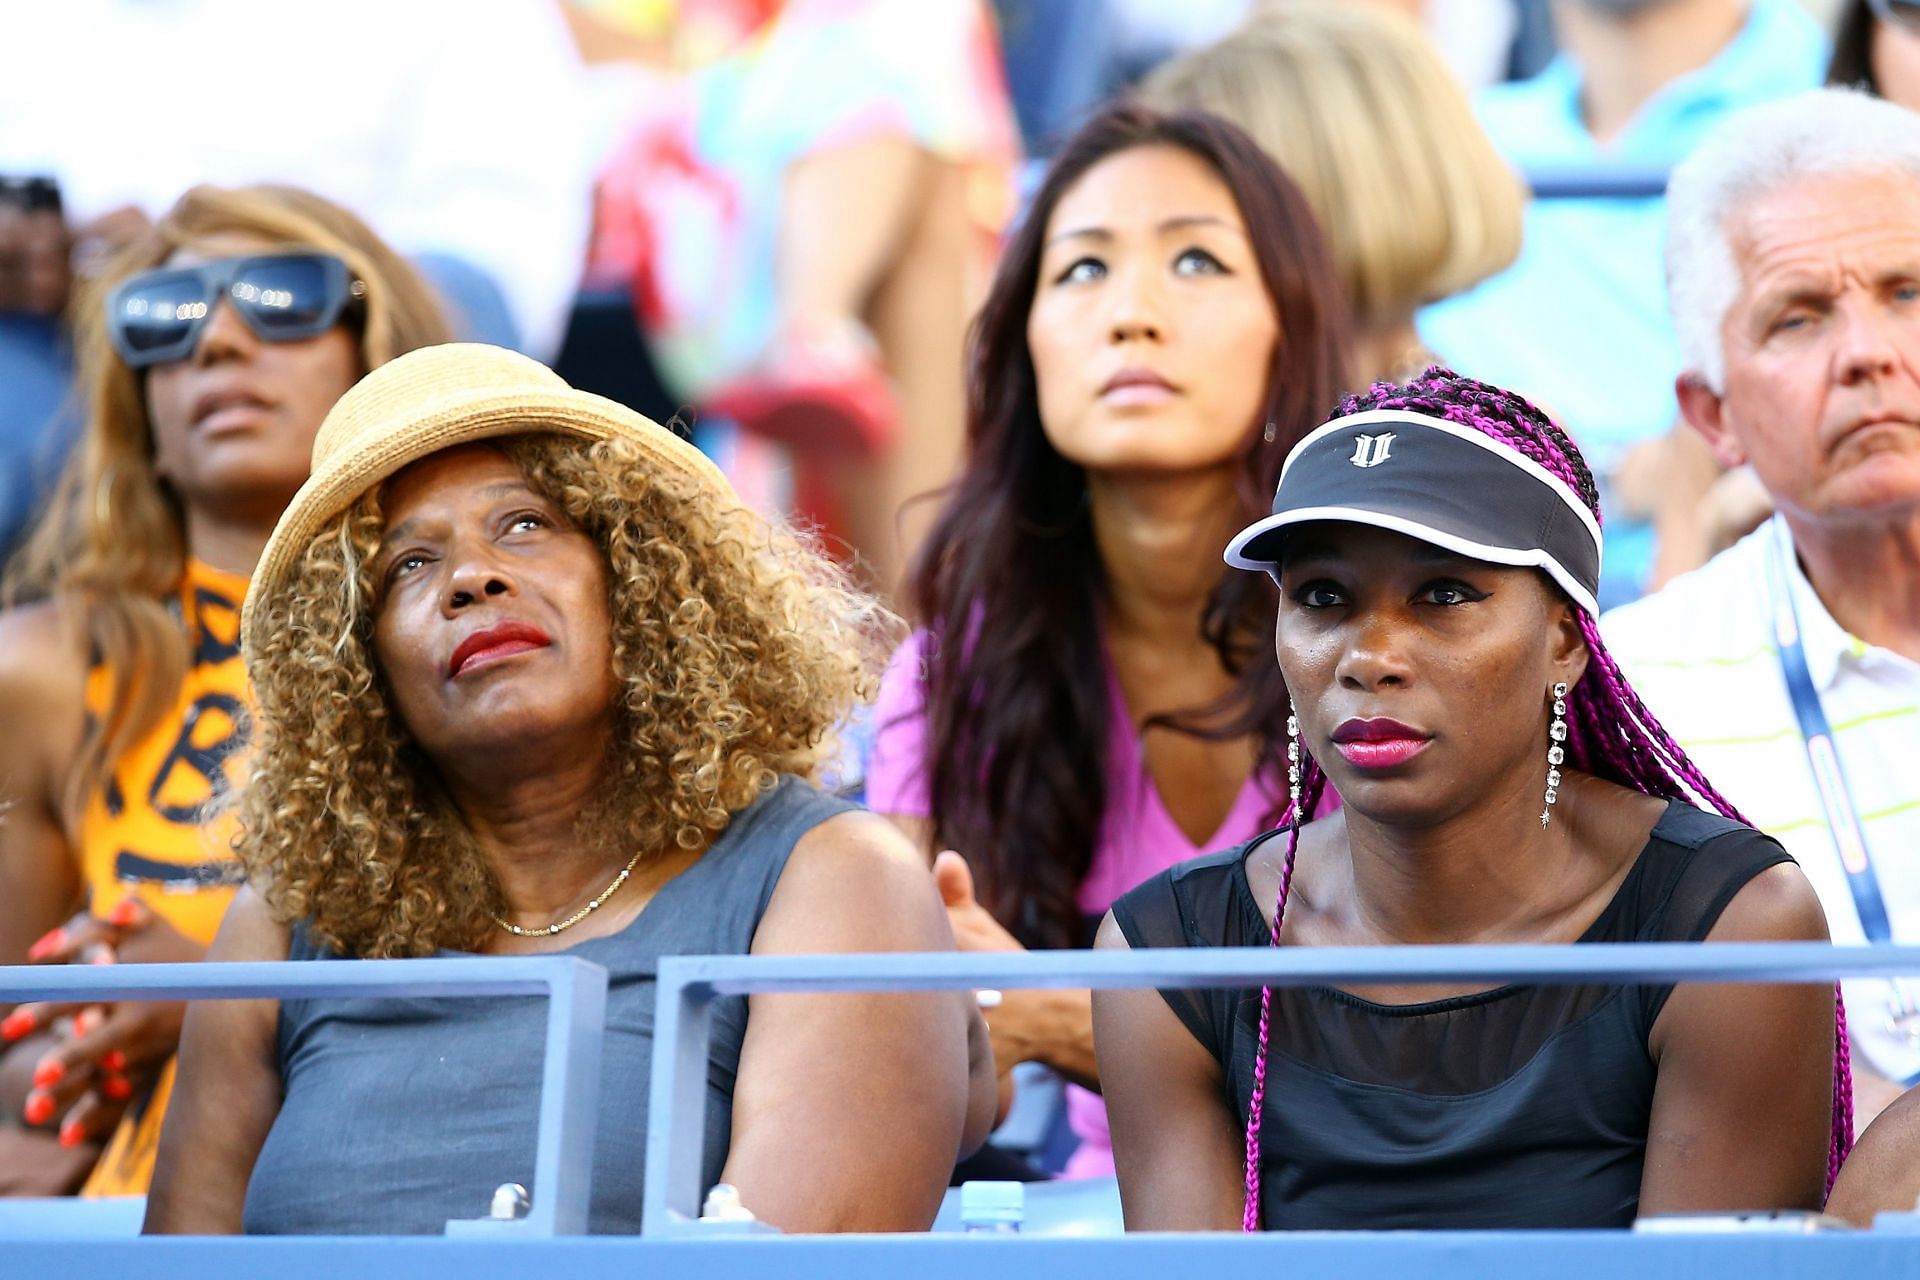 2013 US Open - Day 14